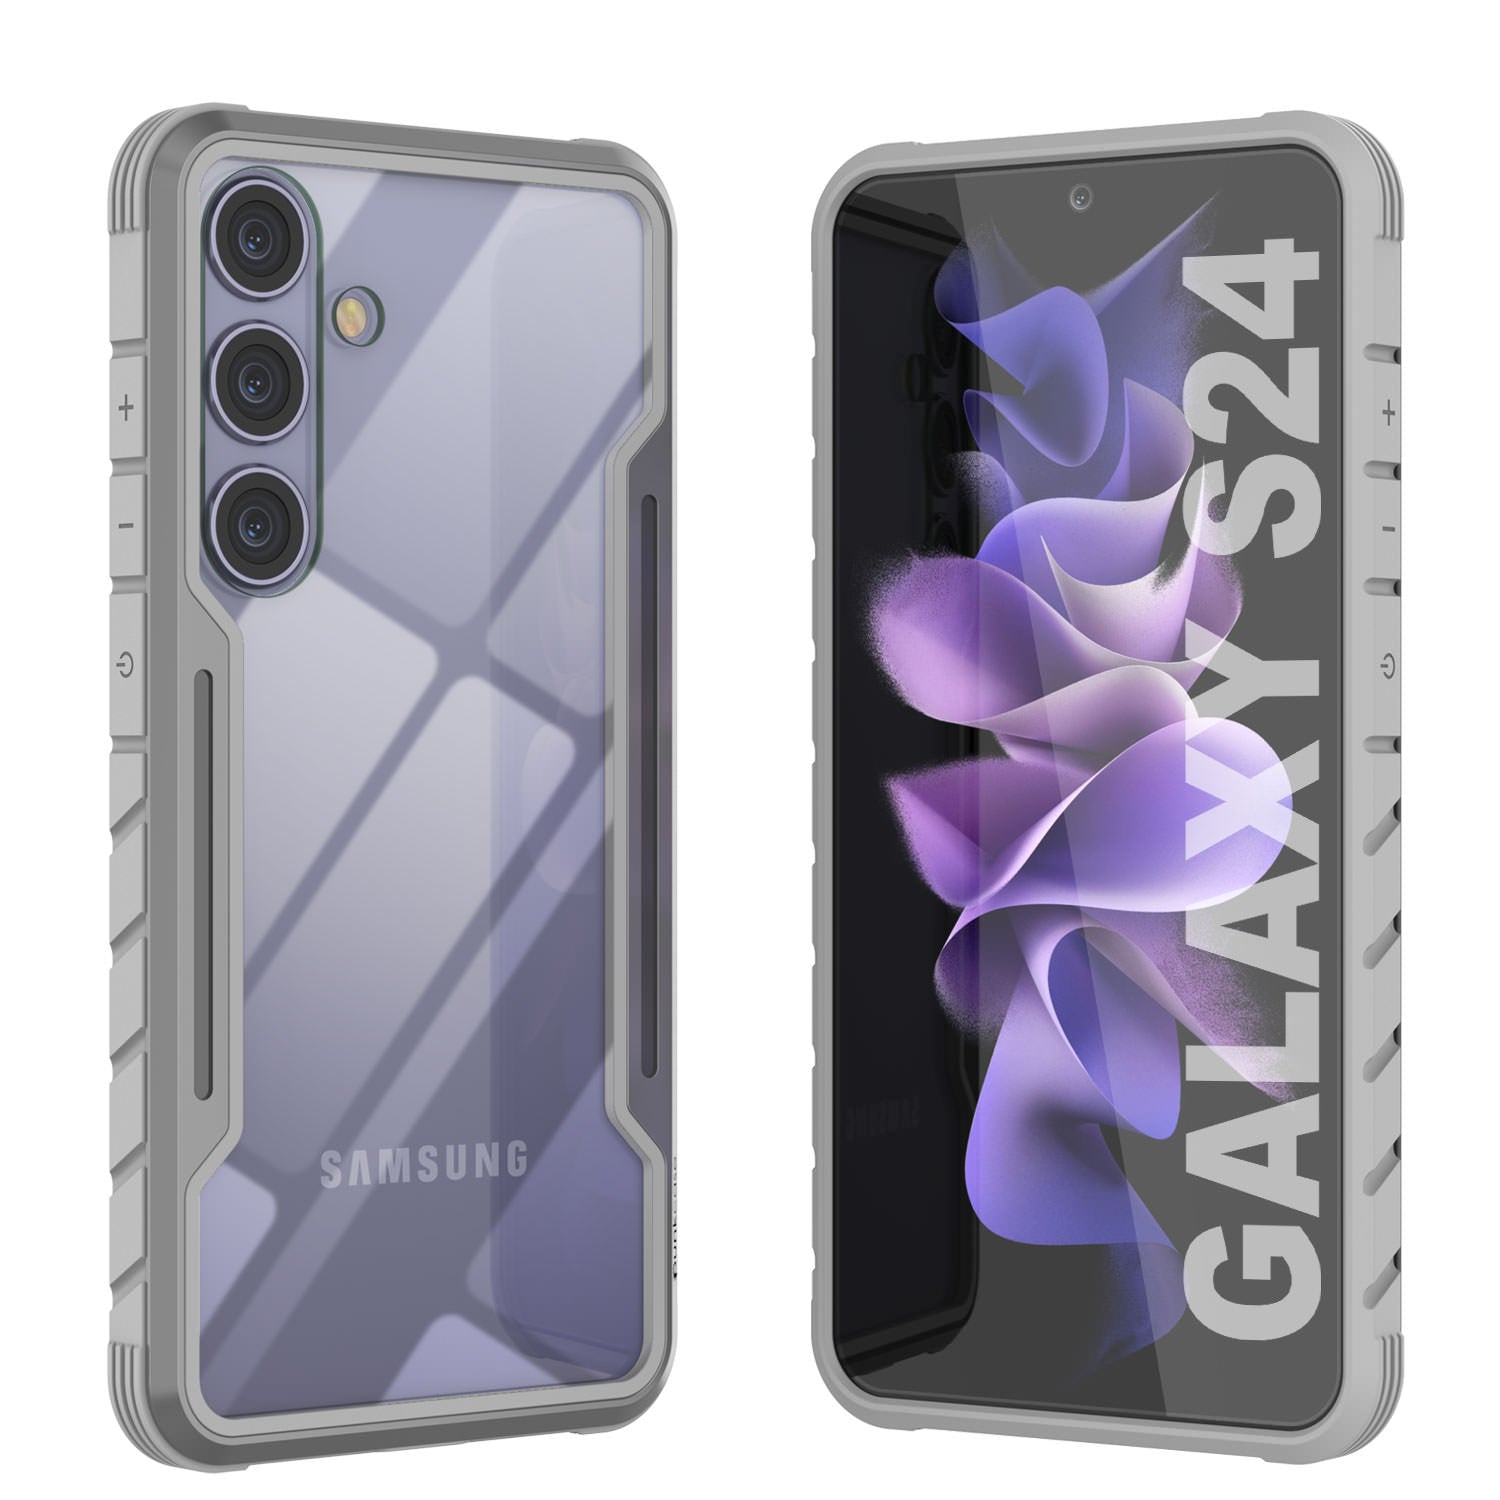 Punkcase S24 Armor Stealth Case Protective Military Grade Multilayer Cover [Grey]